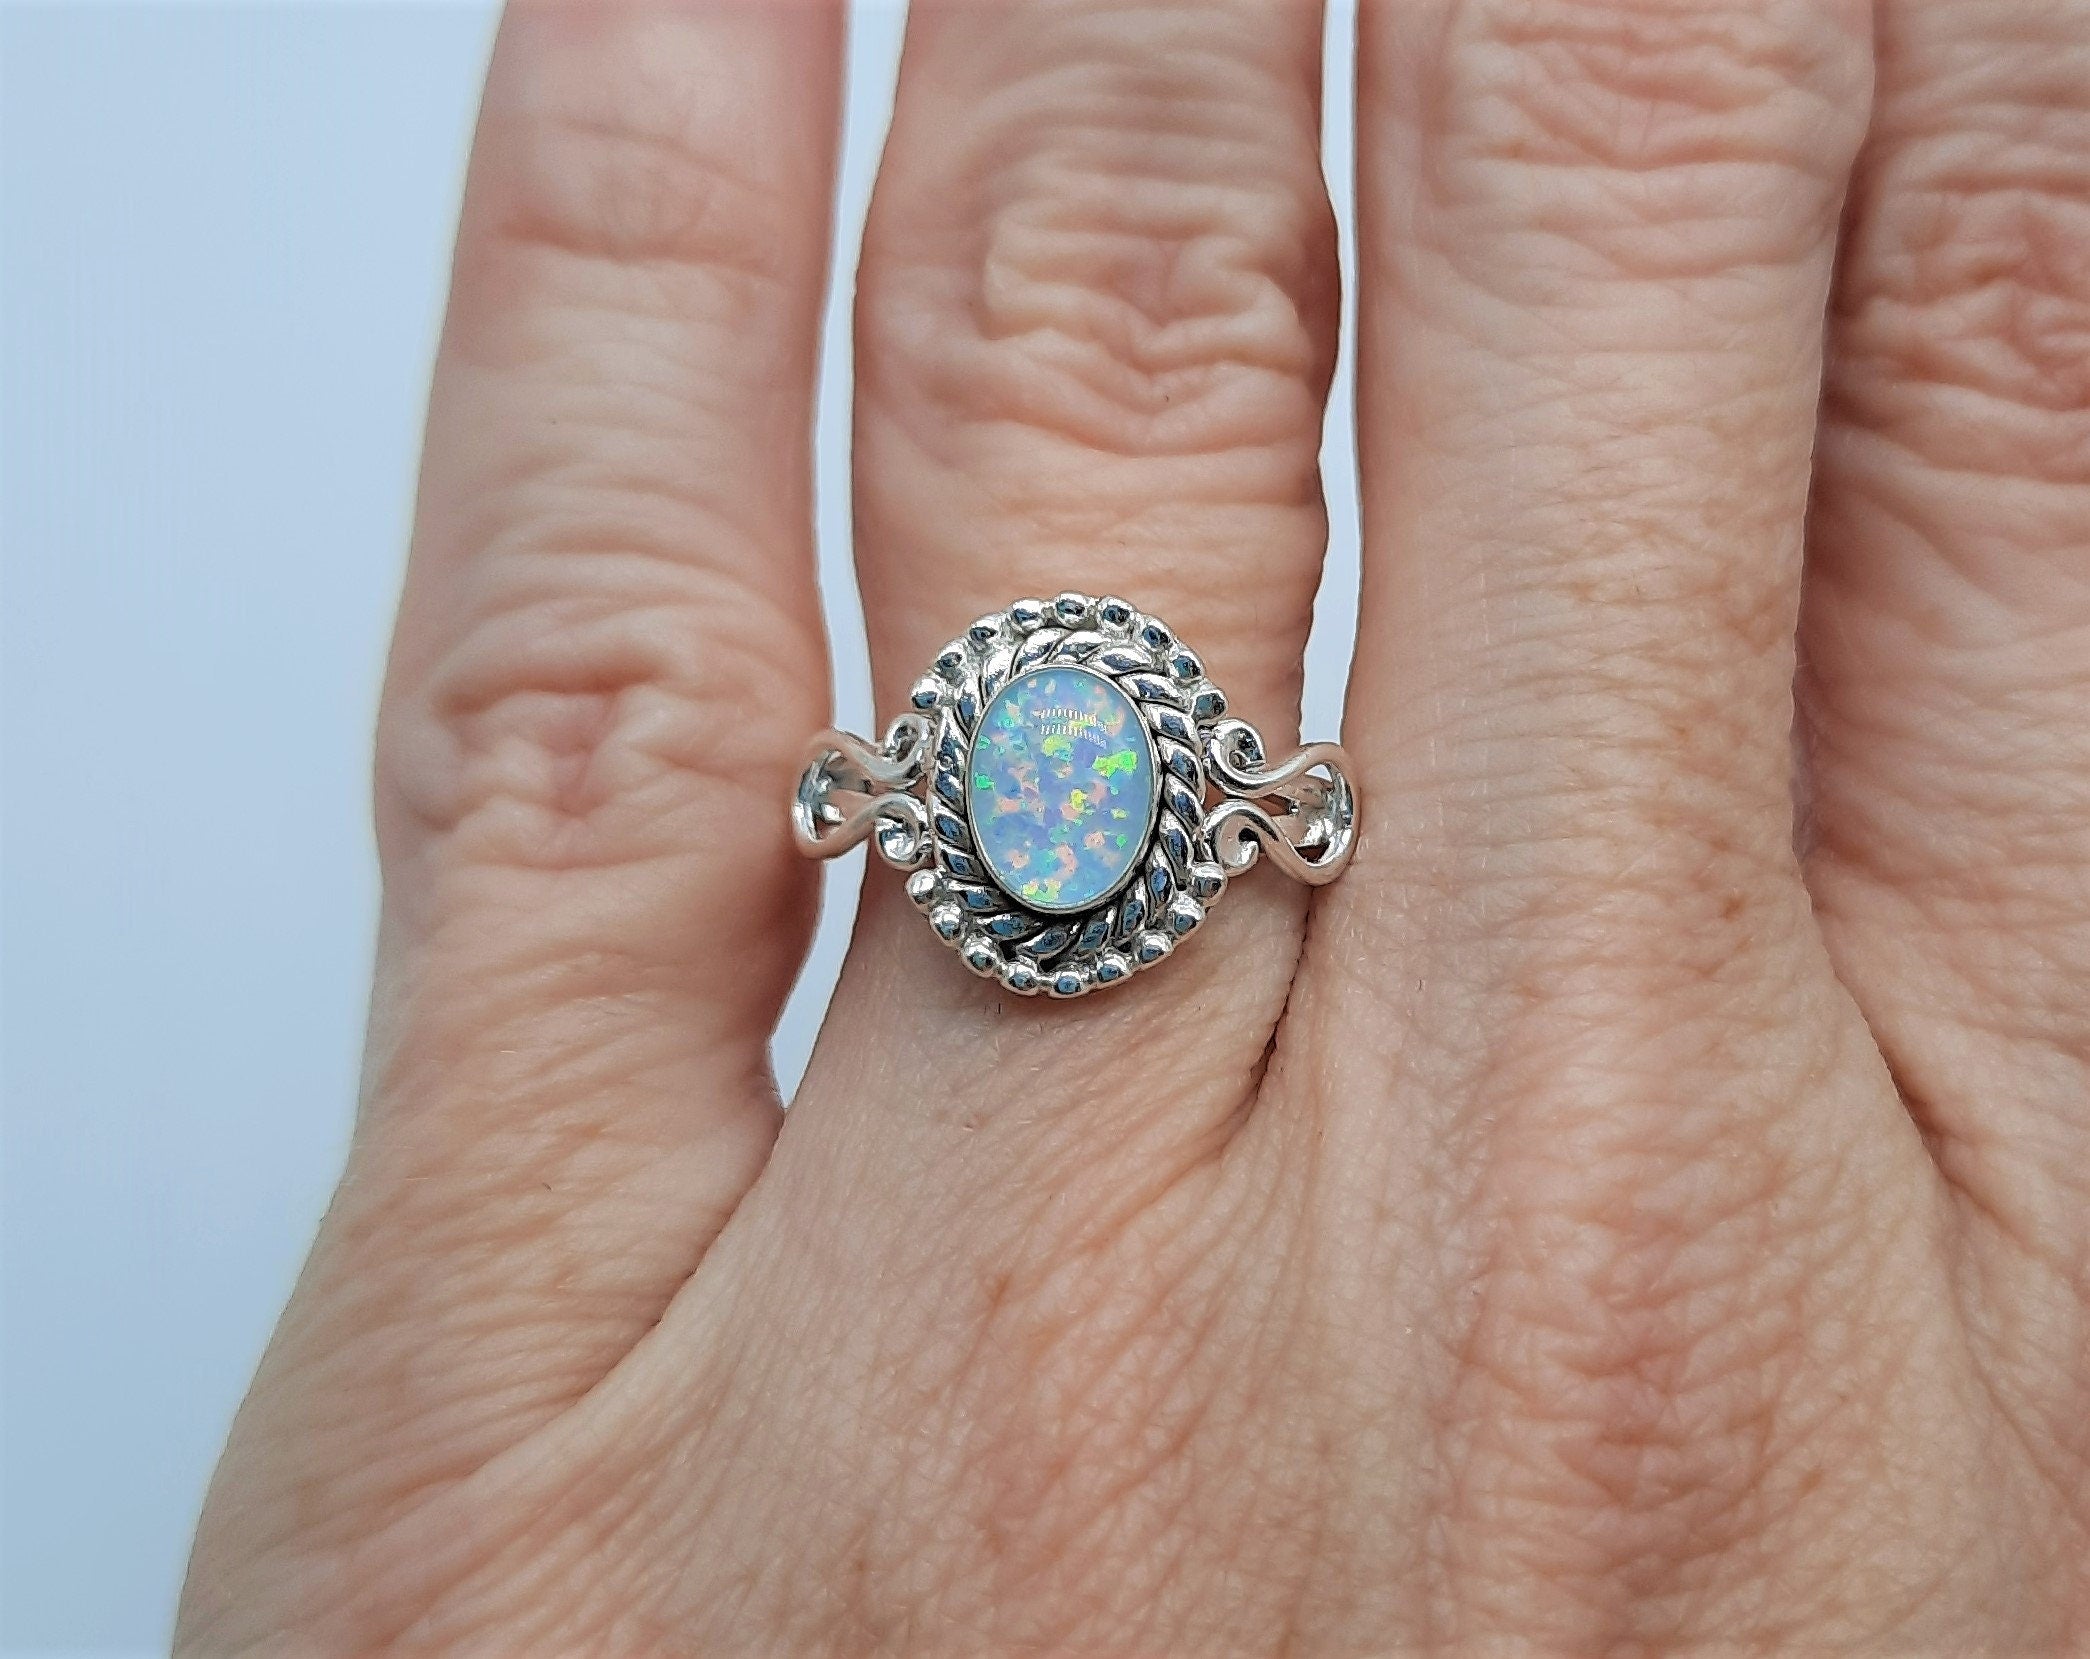 Gold rosette ring with white opal stone K14 – RNG1218 | Kotsonis Jewelry